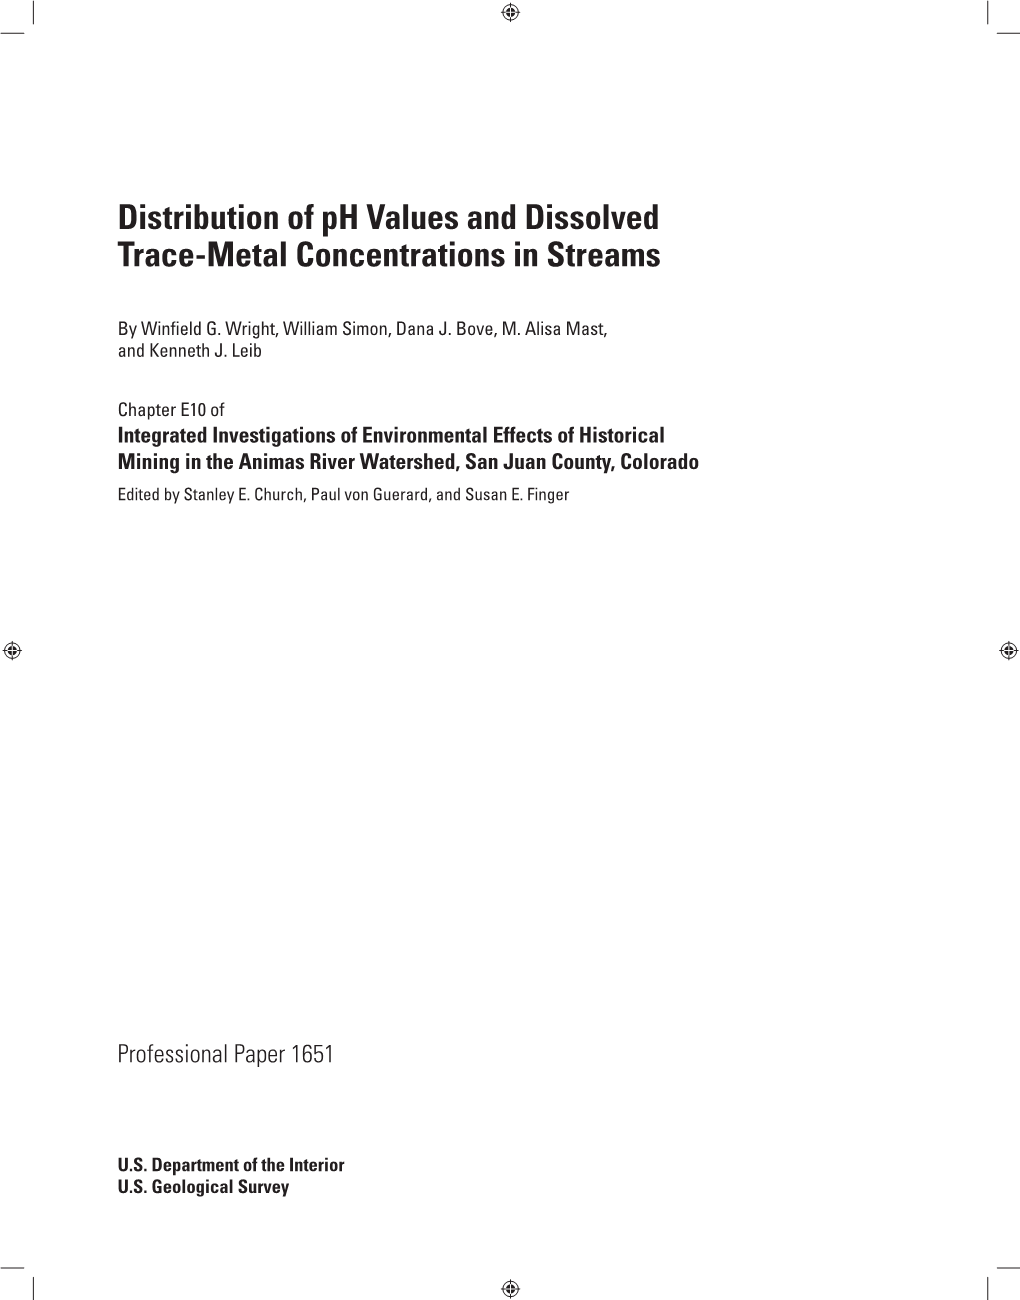 E10. Distribution of Ph Values and Dissolved Trace-Metal Concentrations in Streams